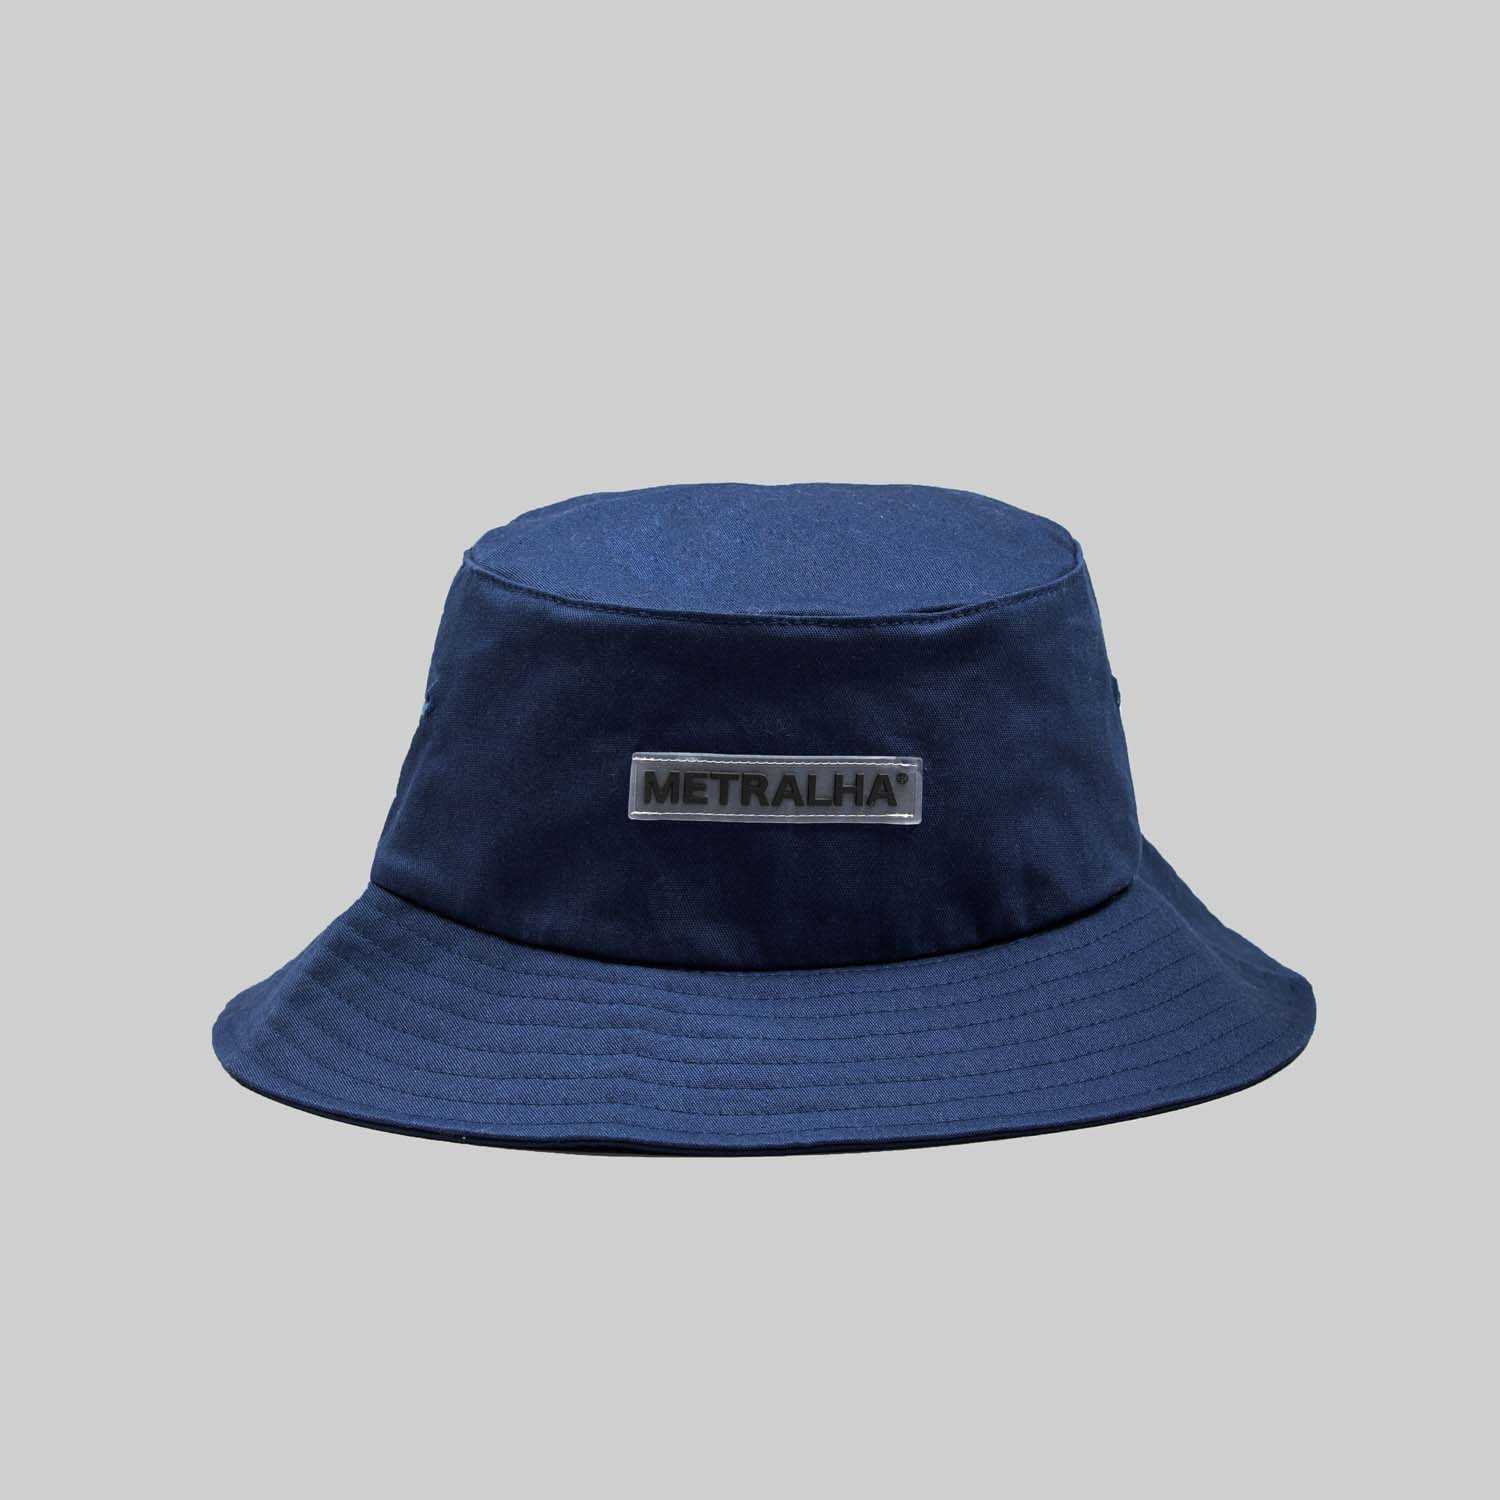 Metralha Worldwide Bucket Hats and Accessories available online